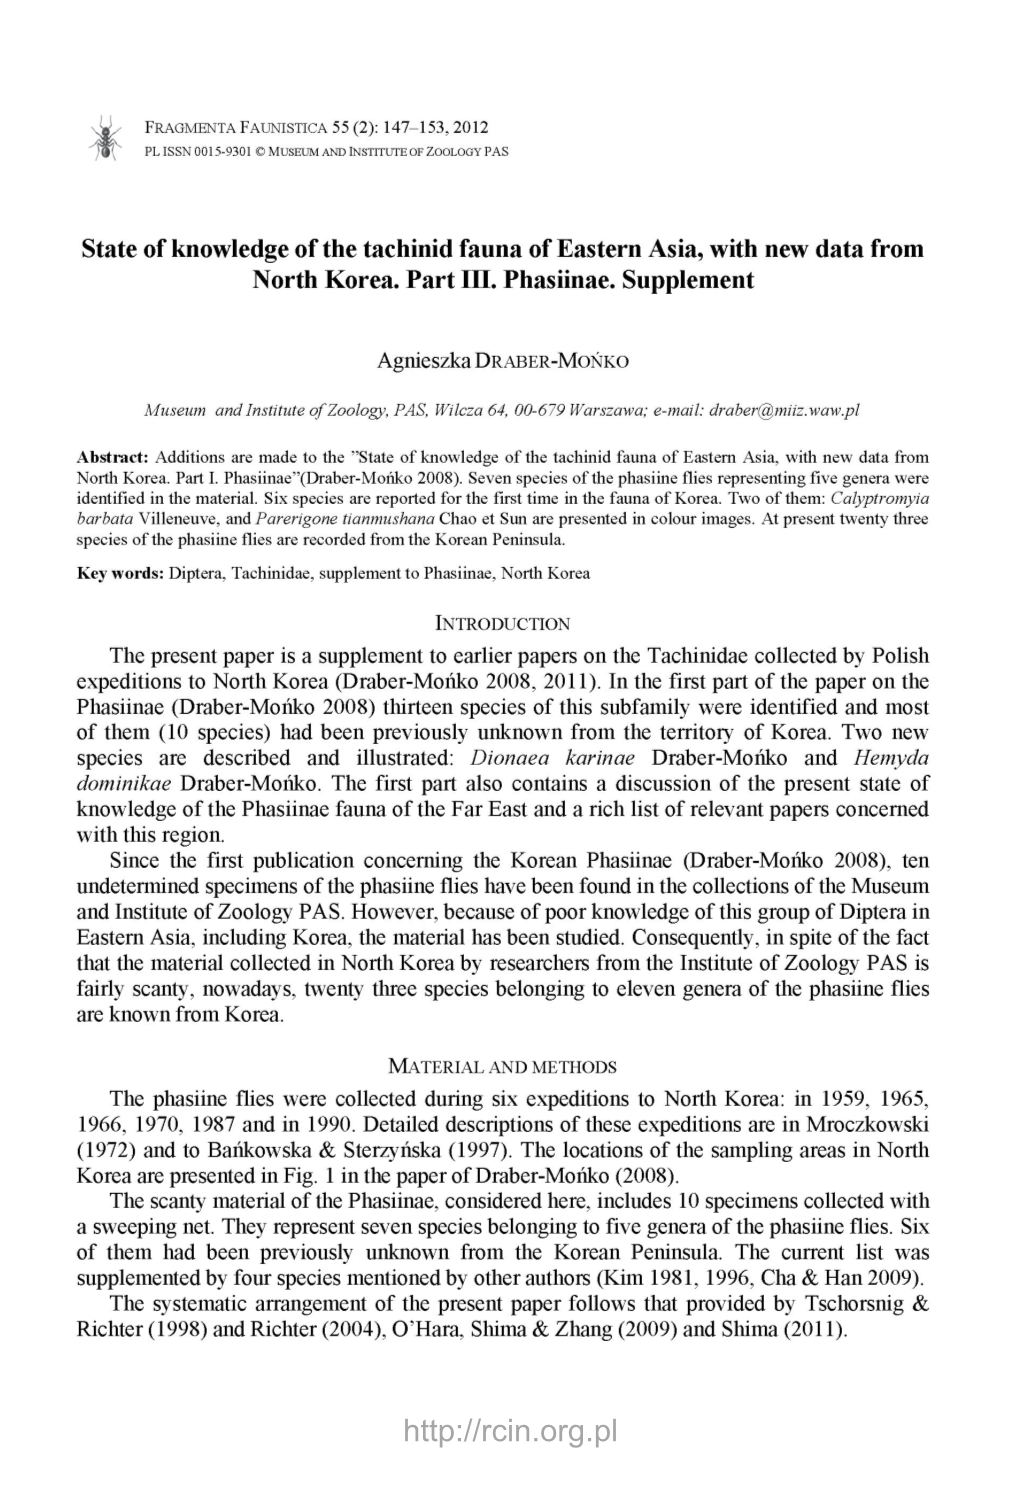 State of Knowledge of the Tachinid Fauna of Eastern Asia, with New Data from North Korea. Pt. 3, Phasiinae. Supplement